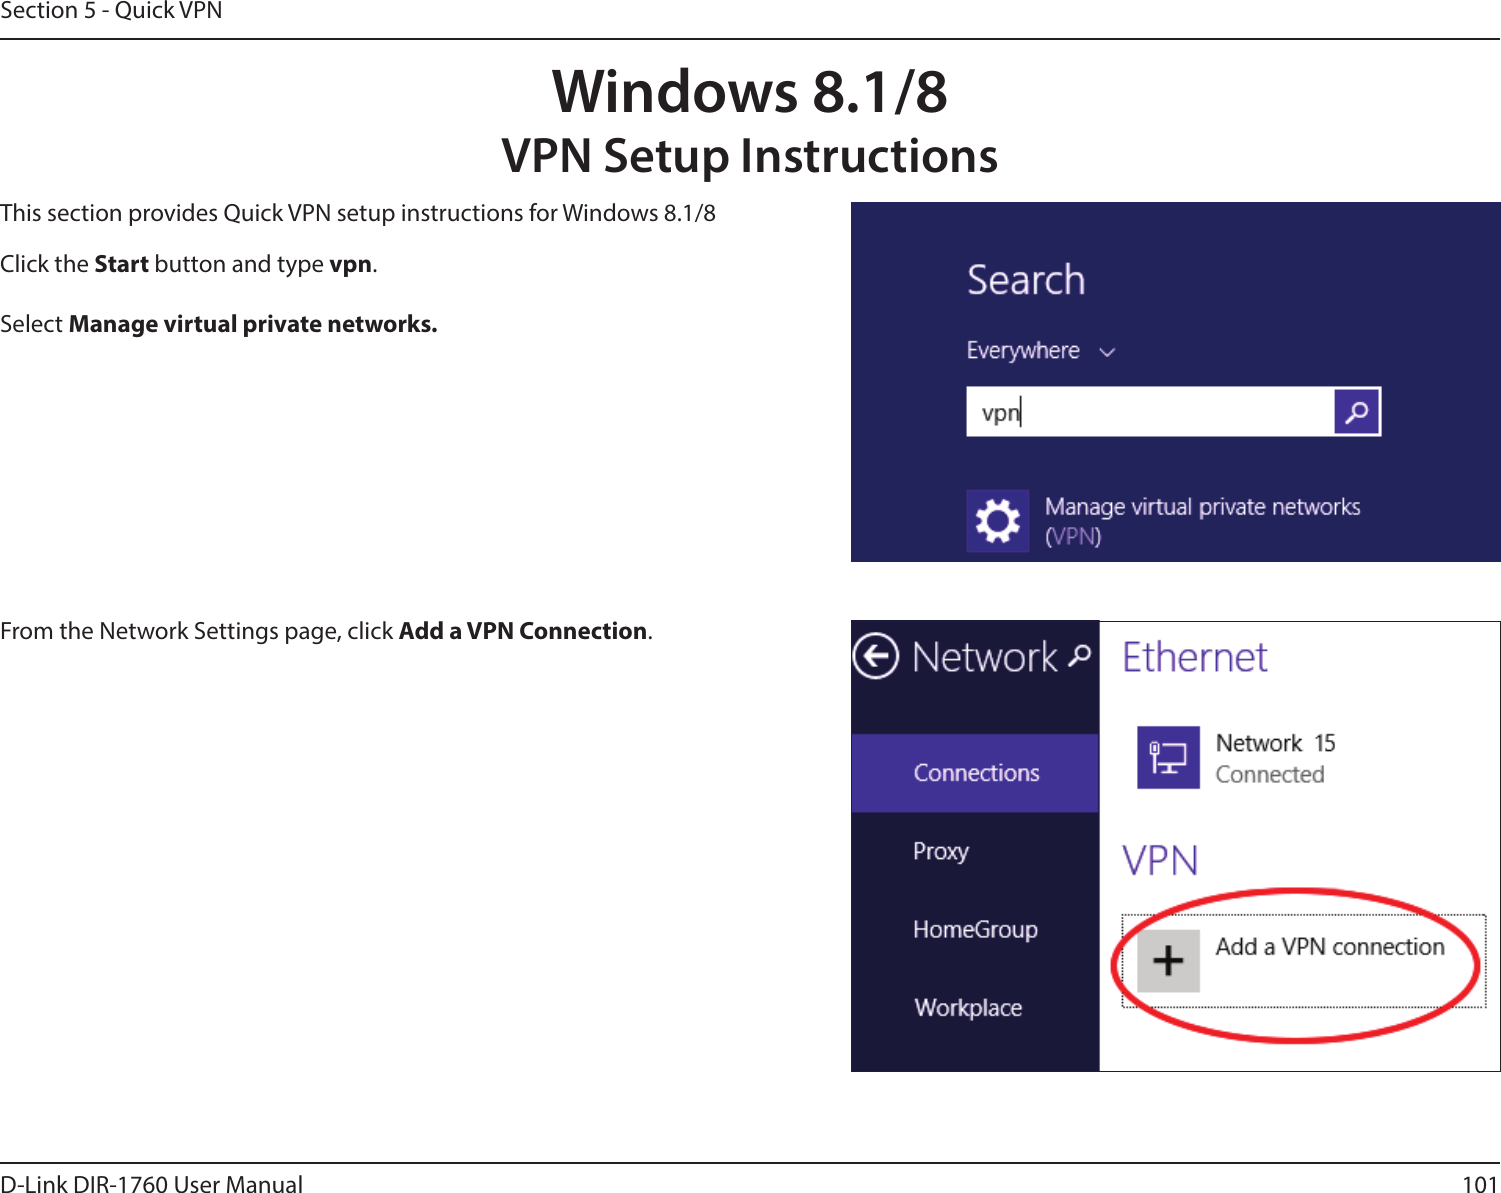 101D-Link DIR-1760 User ManualSection 5 - Quick VPNWindows 8.1/8VPN Setup InstructionsThis section provides Quick VPN setup instructions for Windows 8.1/8Click the Start button and type vpn. Select Manage virtual private networks.From the Network Settings page, click Add a VPN Connection.